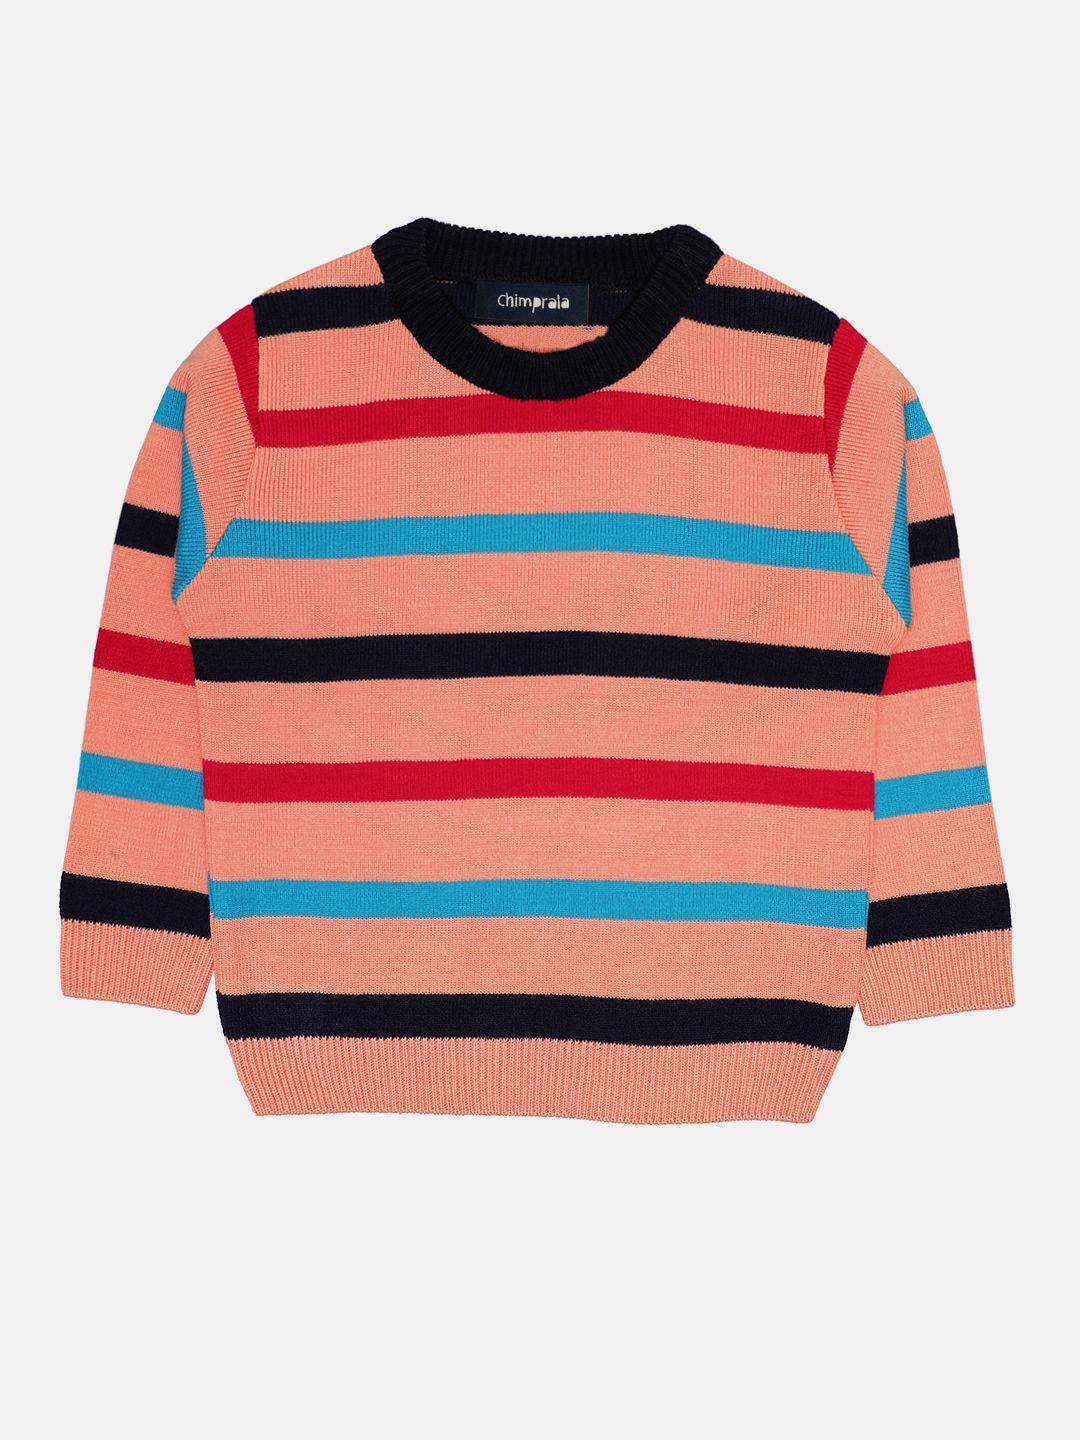 chimprala-boys-pink-&-red-striped-woolen-pullover